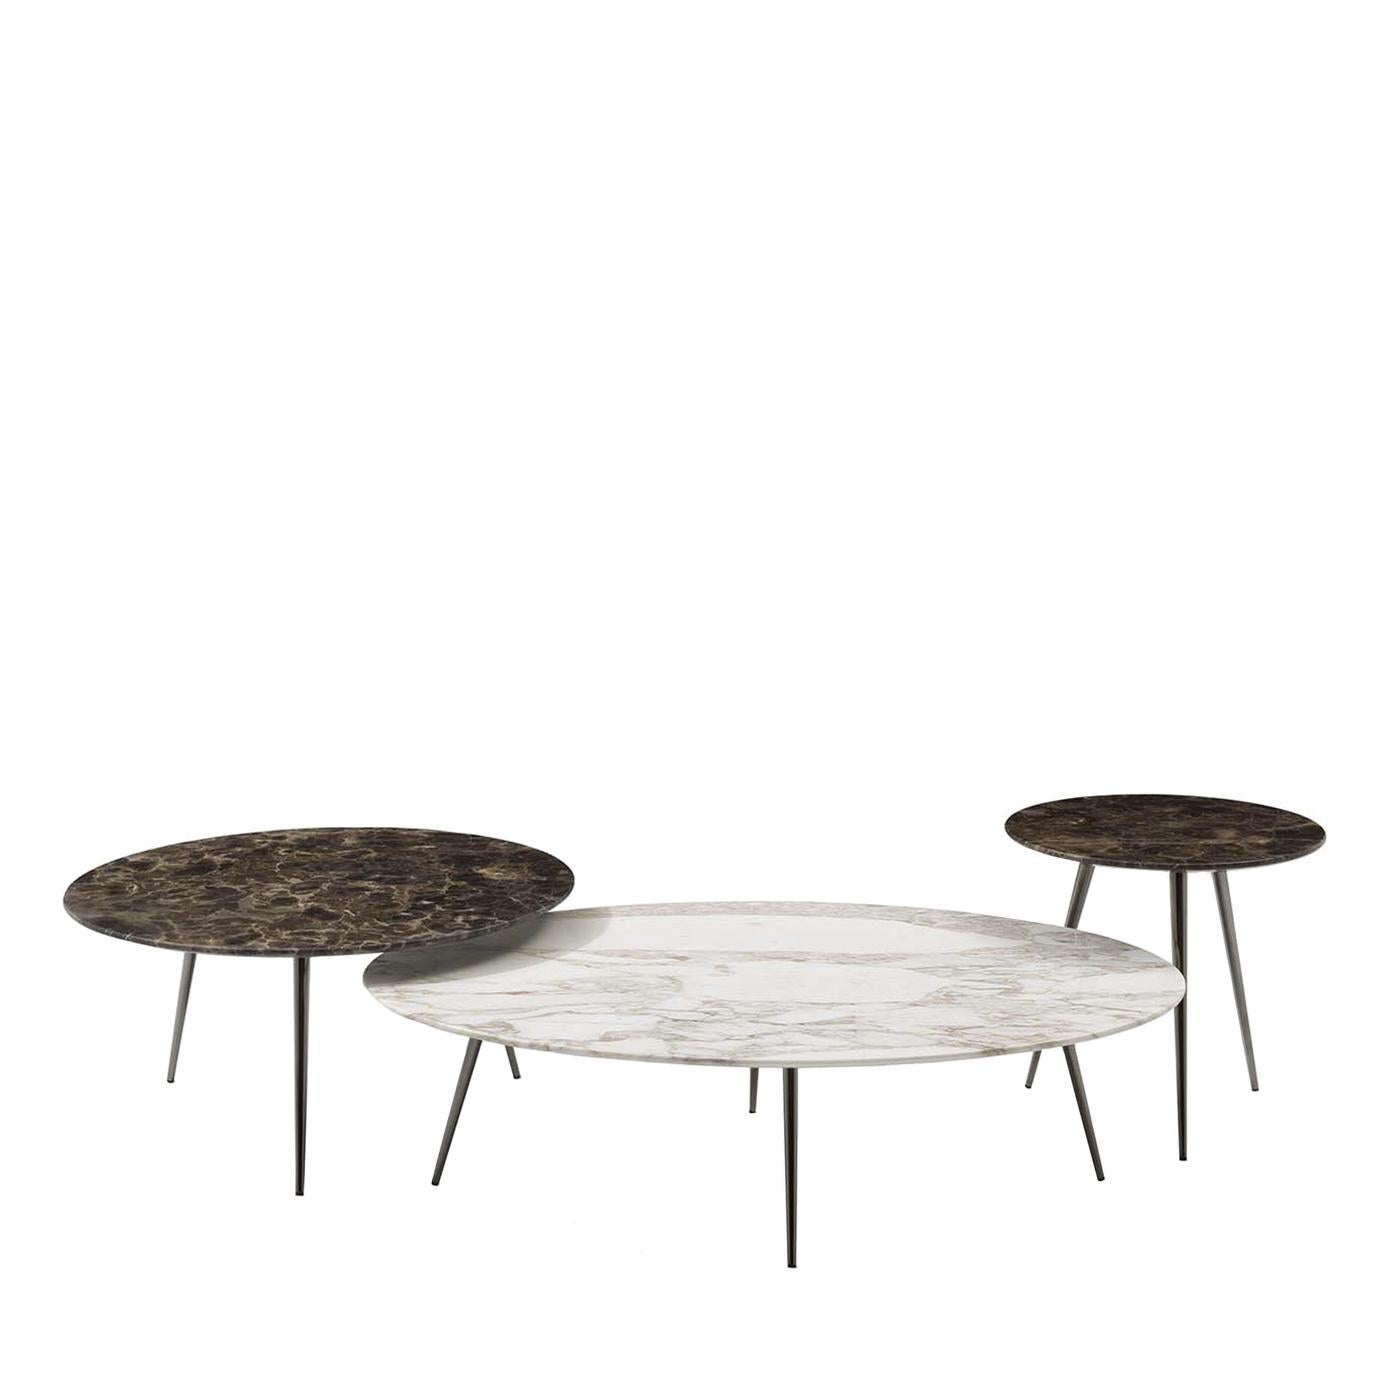 3 nesting coffee tables